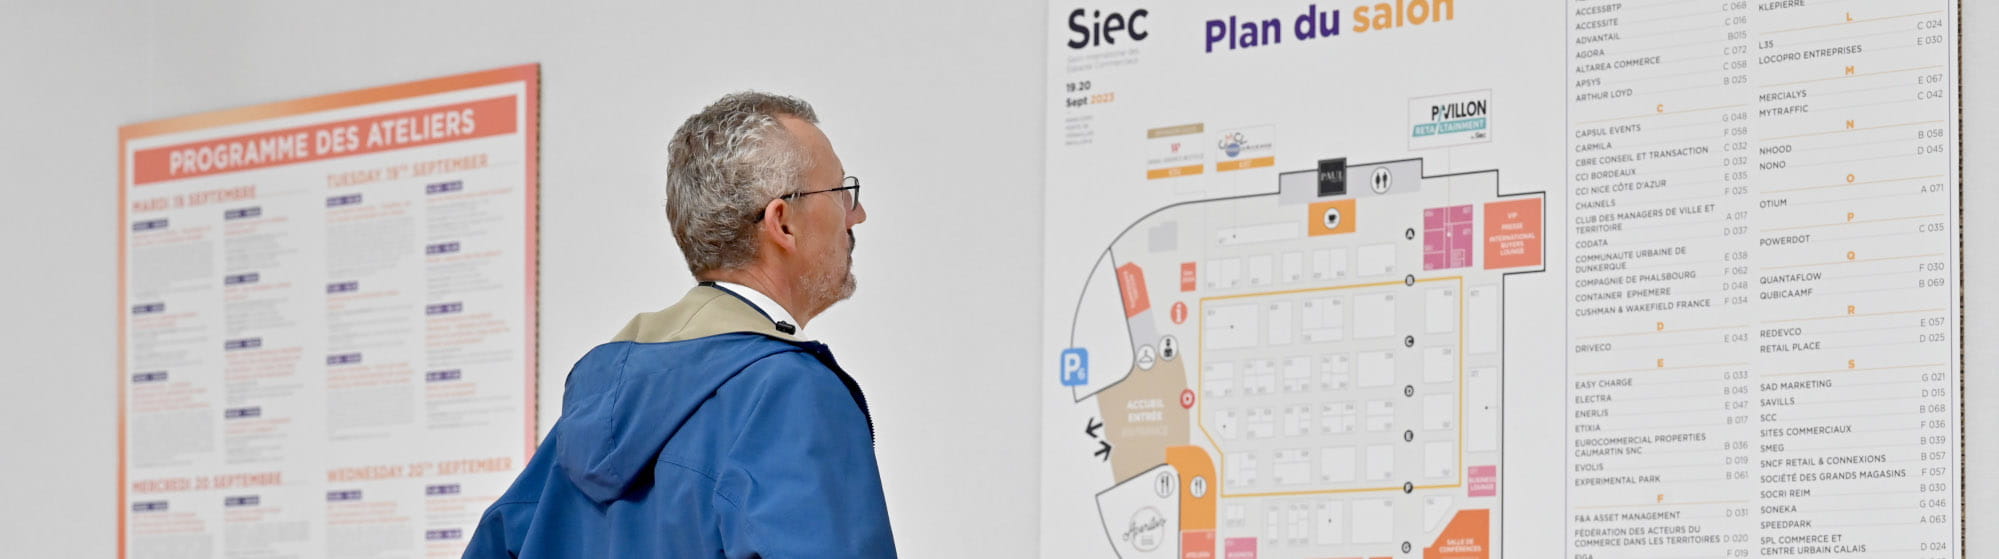 Visitor looking at the floor plan of the Siec event